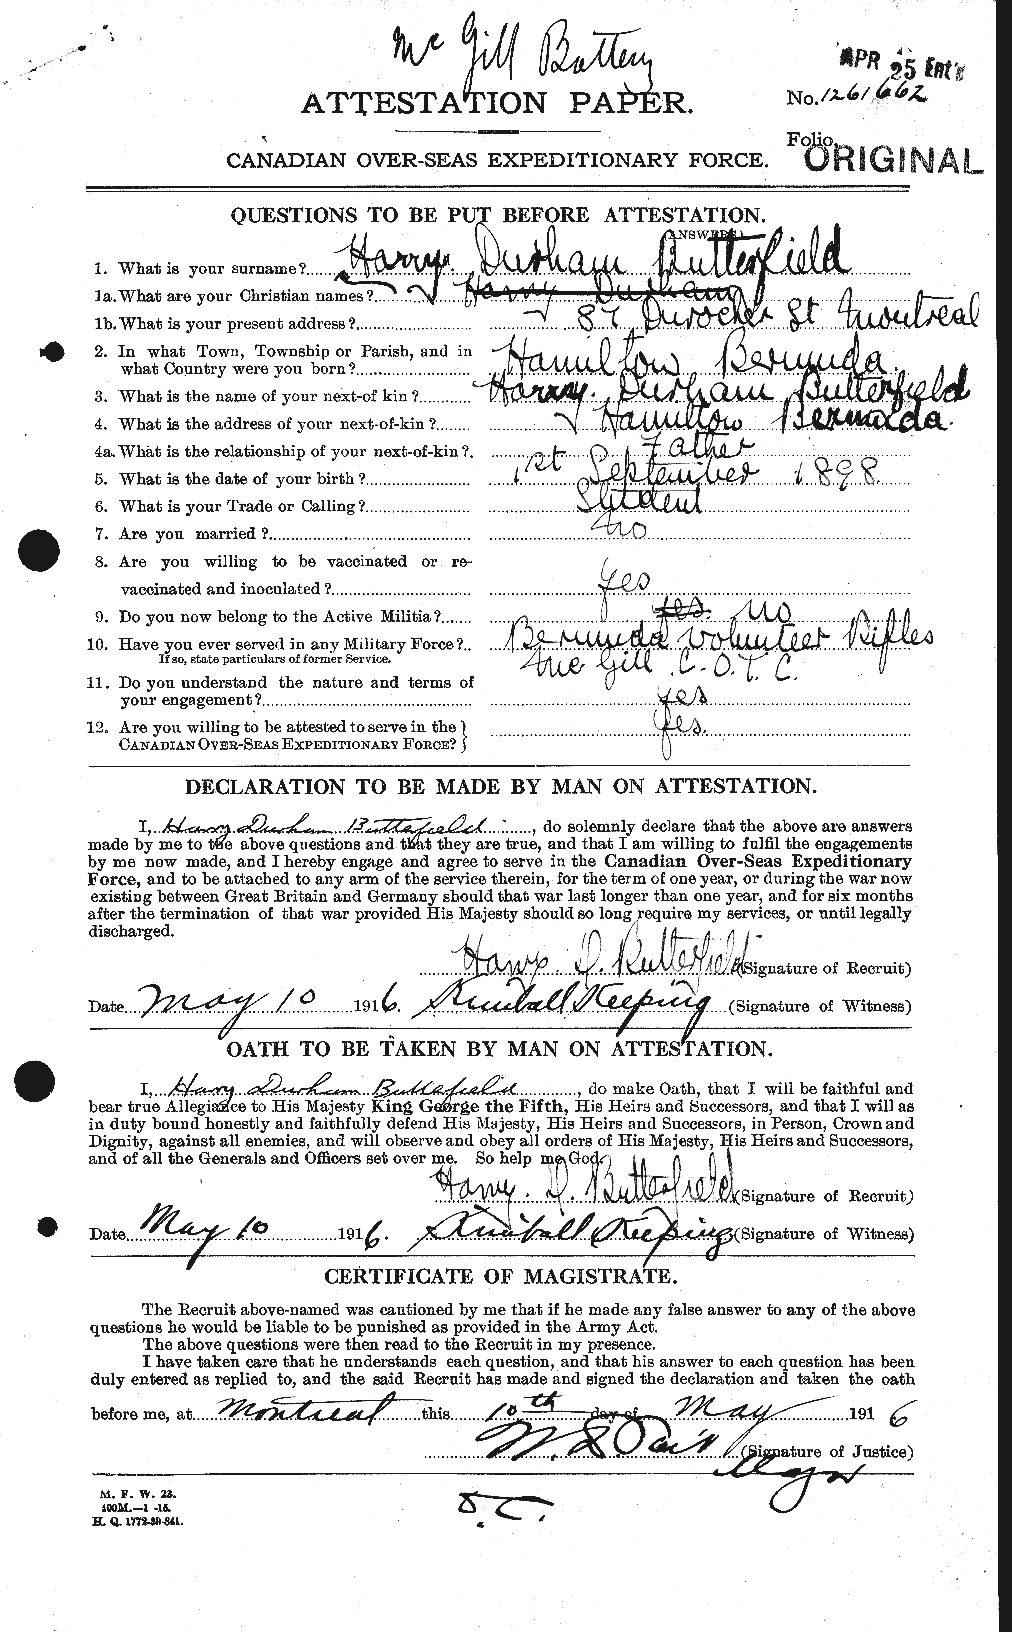 Personnel Records of the First World War - CEF 278240a